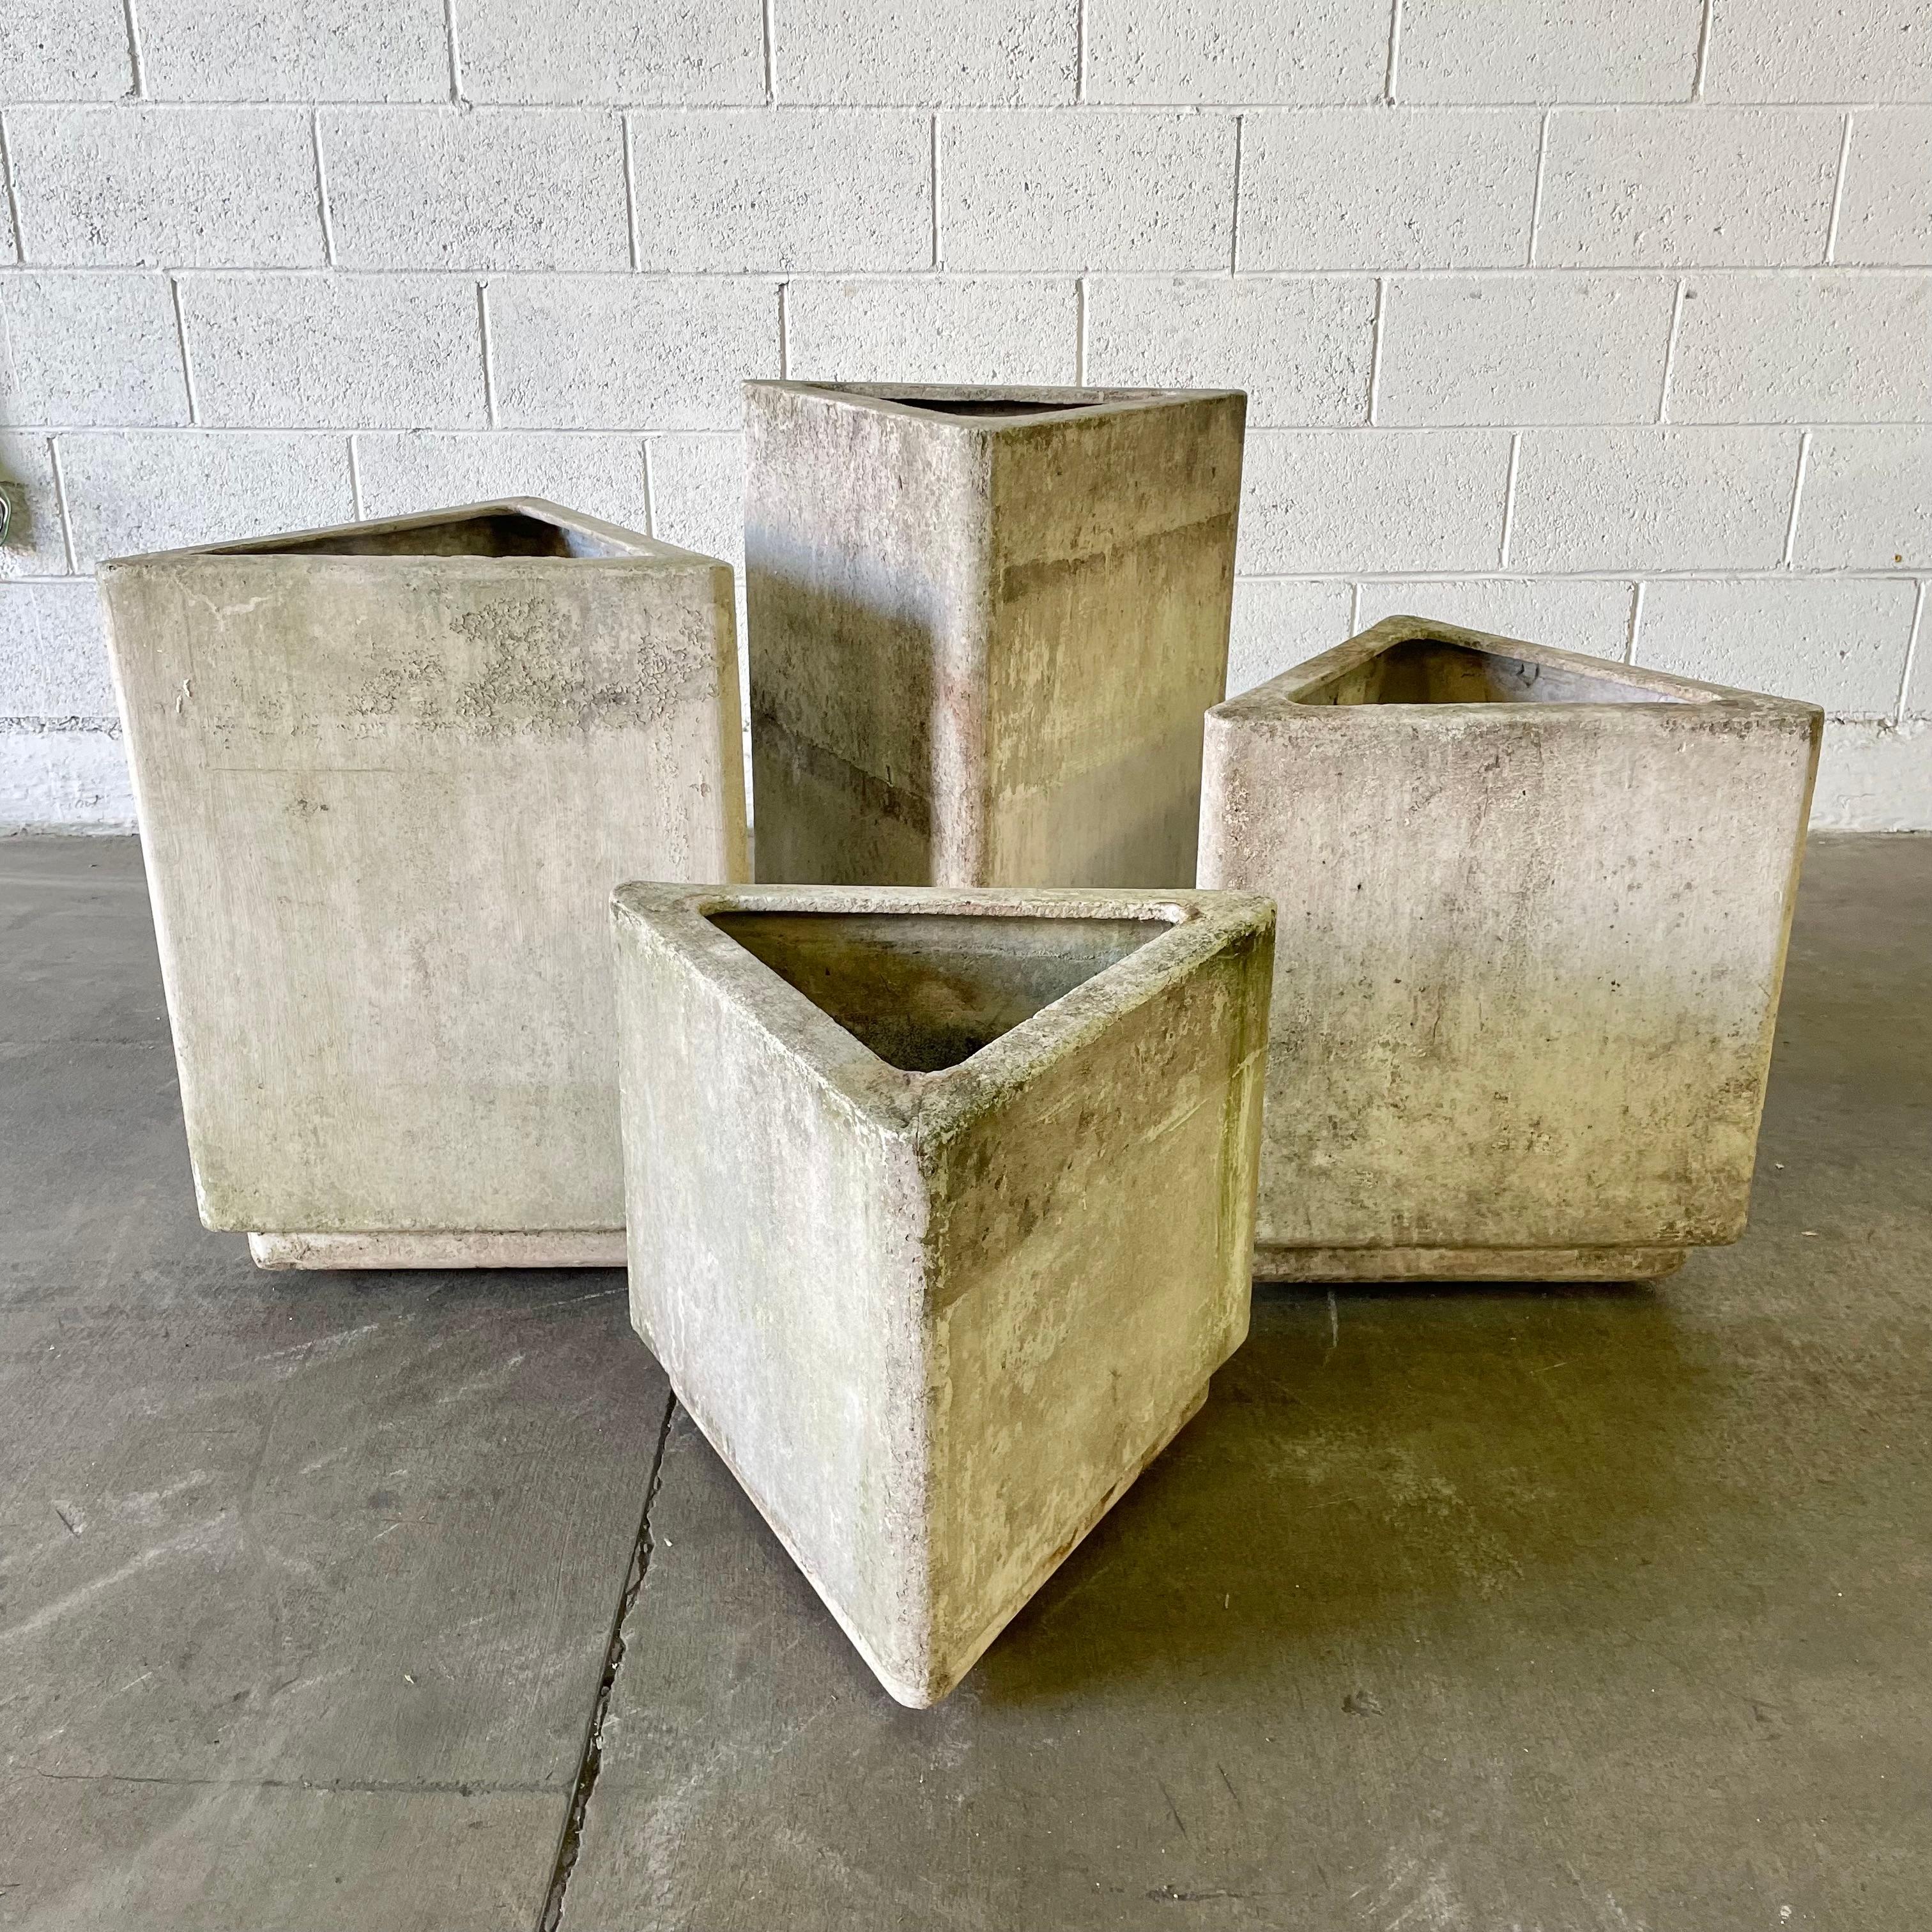 Important set of triangular concrete planters by Swiss Architect Willy Guhl. Only set on the planet for sale. 4 triangles of variable heights, with the same depth and width. Pieces can be arranged in a multitude of ways. Each triangle sits atop